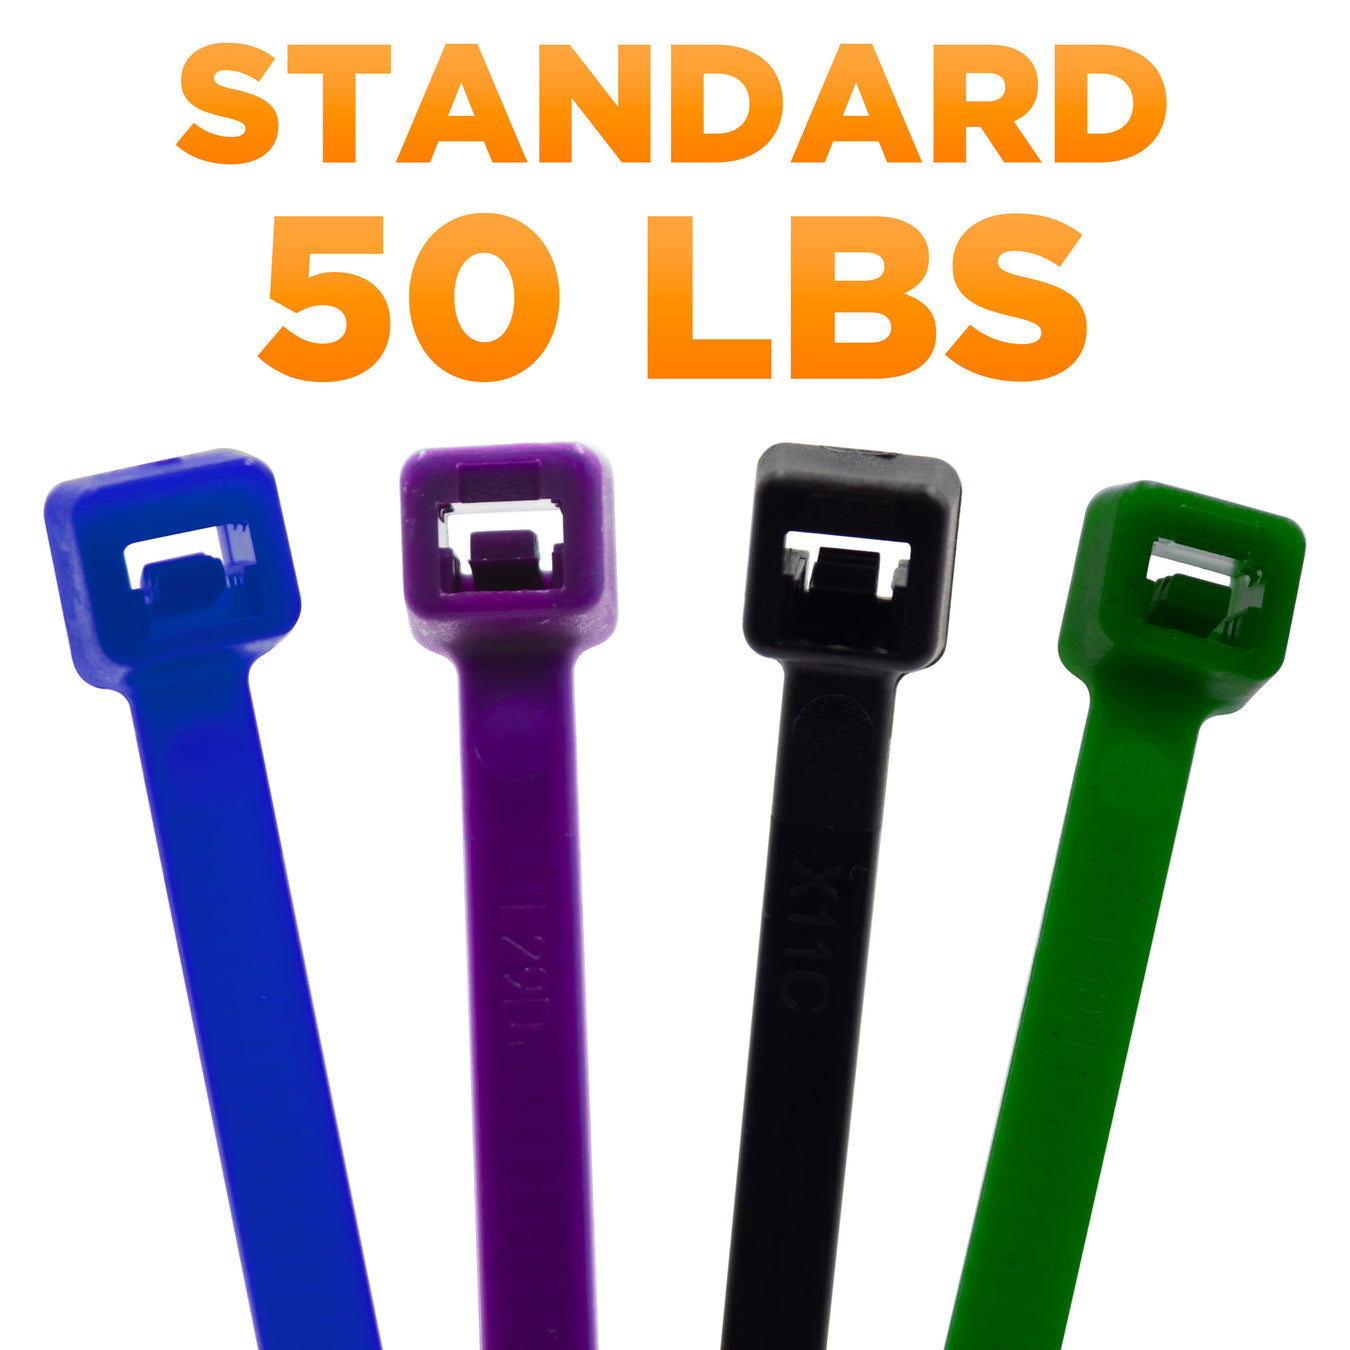 Standard Cable Ties (50 lbs)